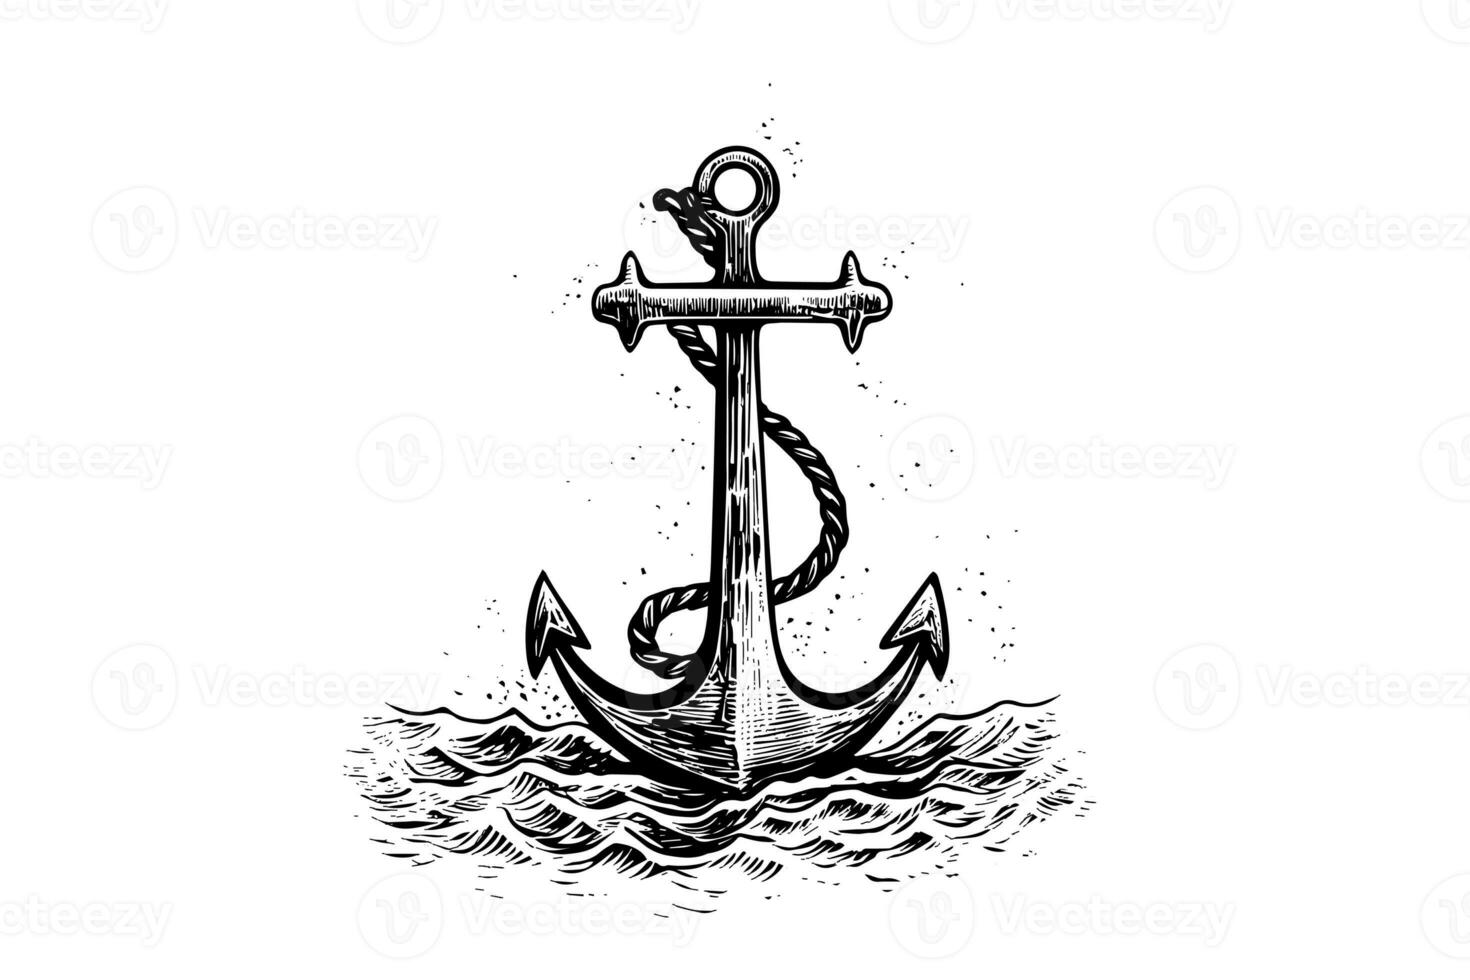 Ship sea anchor and rope in vintage engraving style. Sketch hand drawn vector illustration. photo